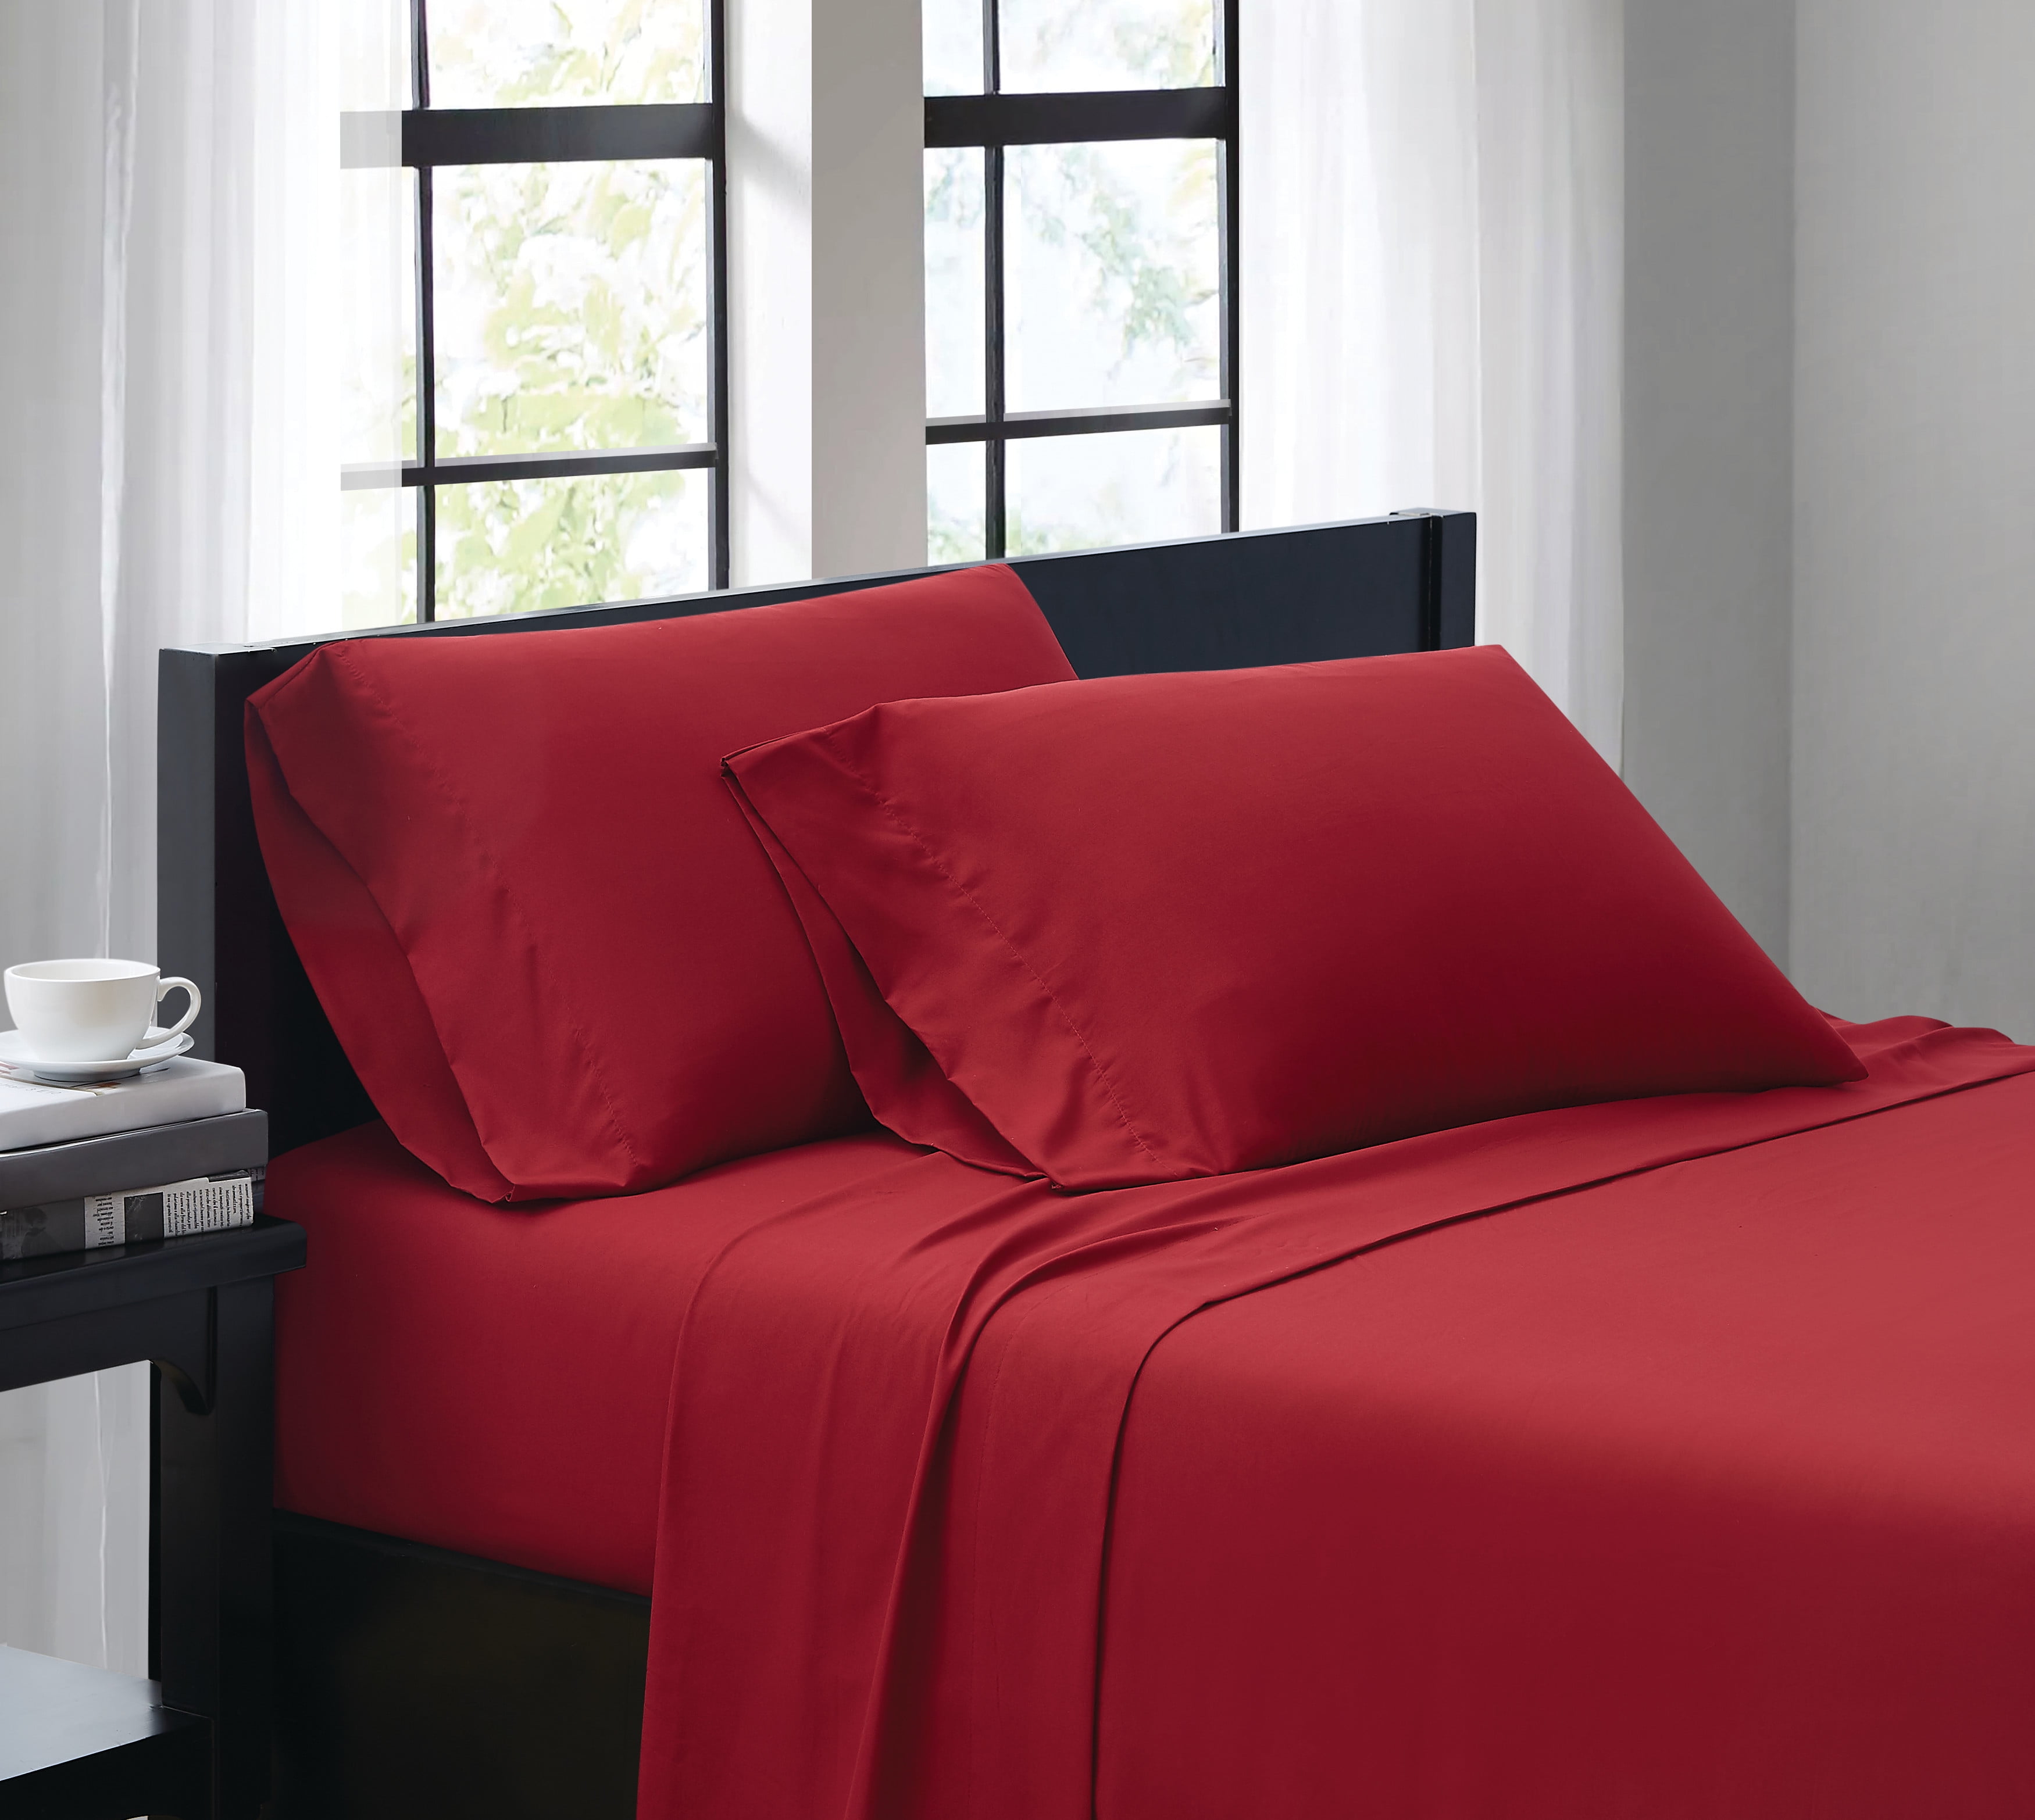 Truly Soft Everyday Red Twin XL Sheet Set